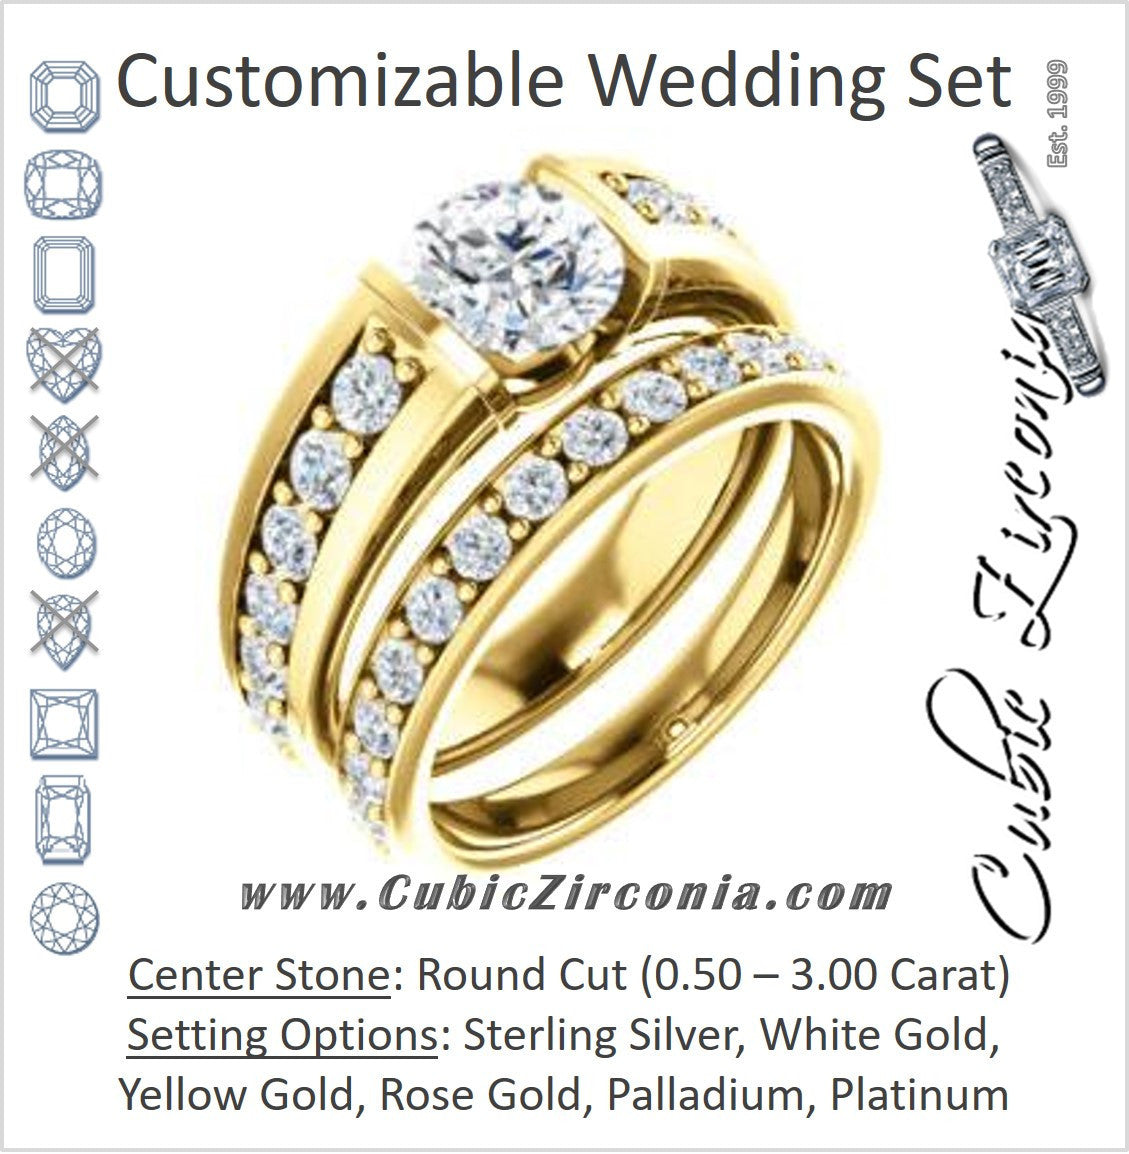 CZ Wedding Set, featuring The Rosemary engagement ring (Customizable Round Cut Tension Bar Set with Wide Channel/Prong Band)